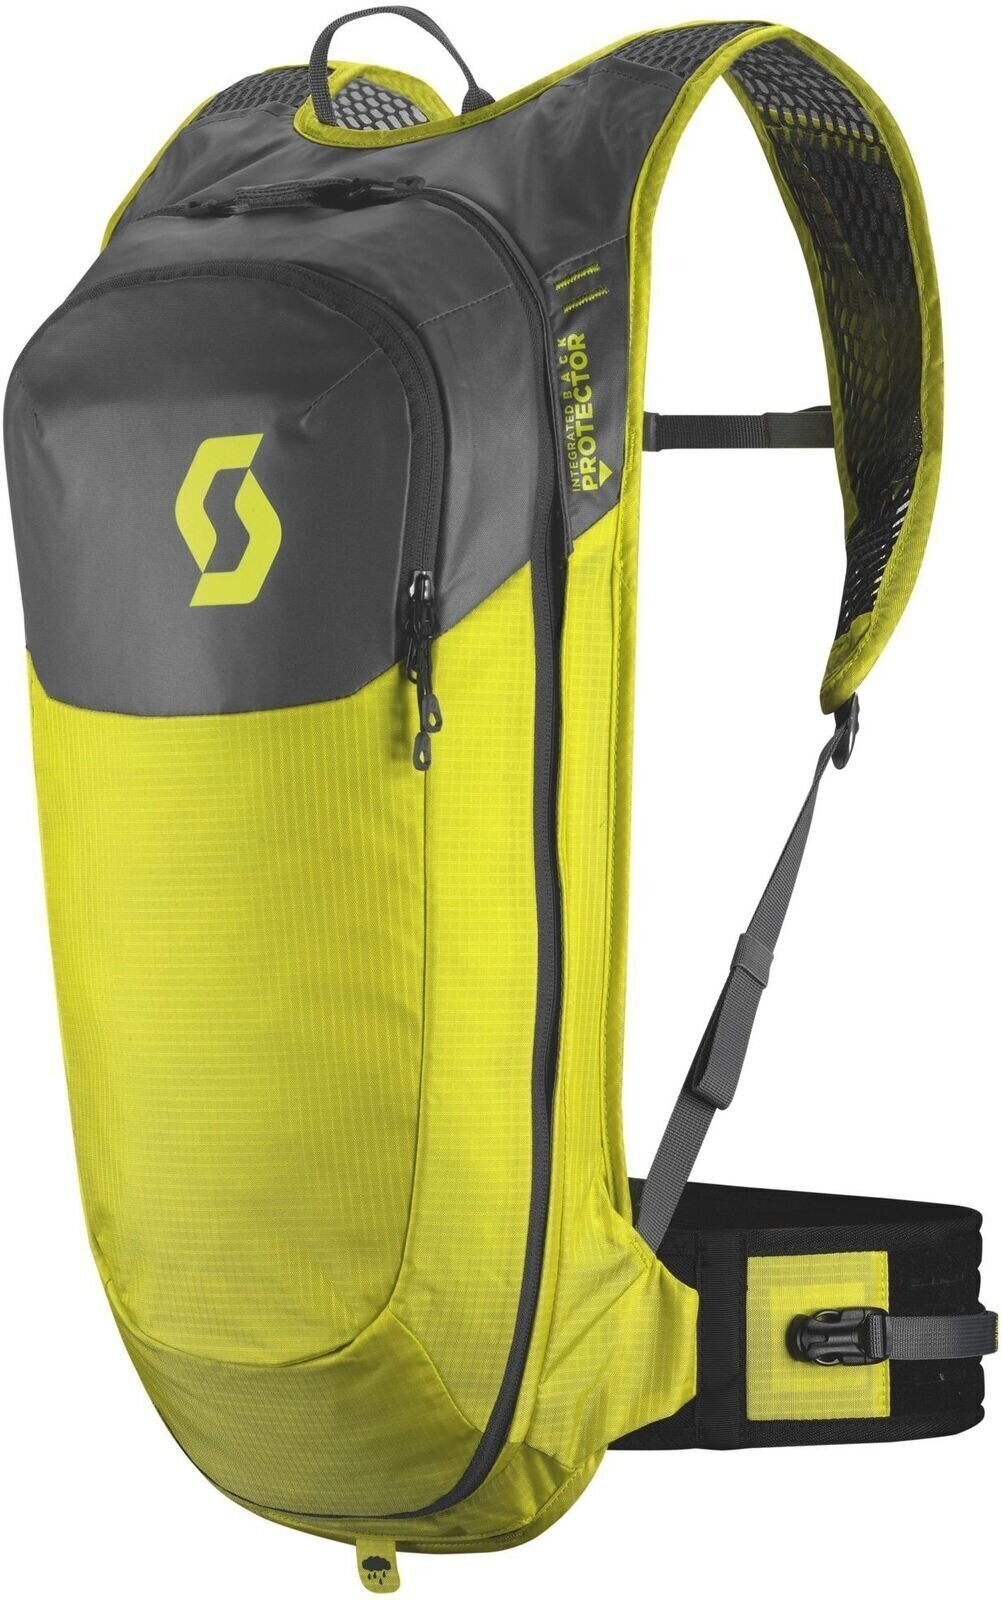 Cycling backpack and accessories Scott Trail Protect FR' 10 Sulphur Yellow/Dark Grey